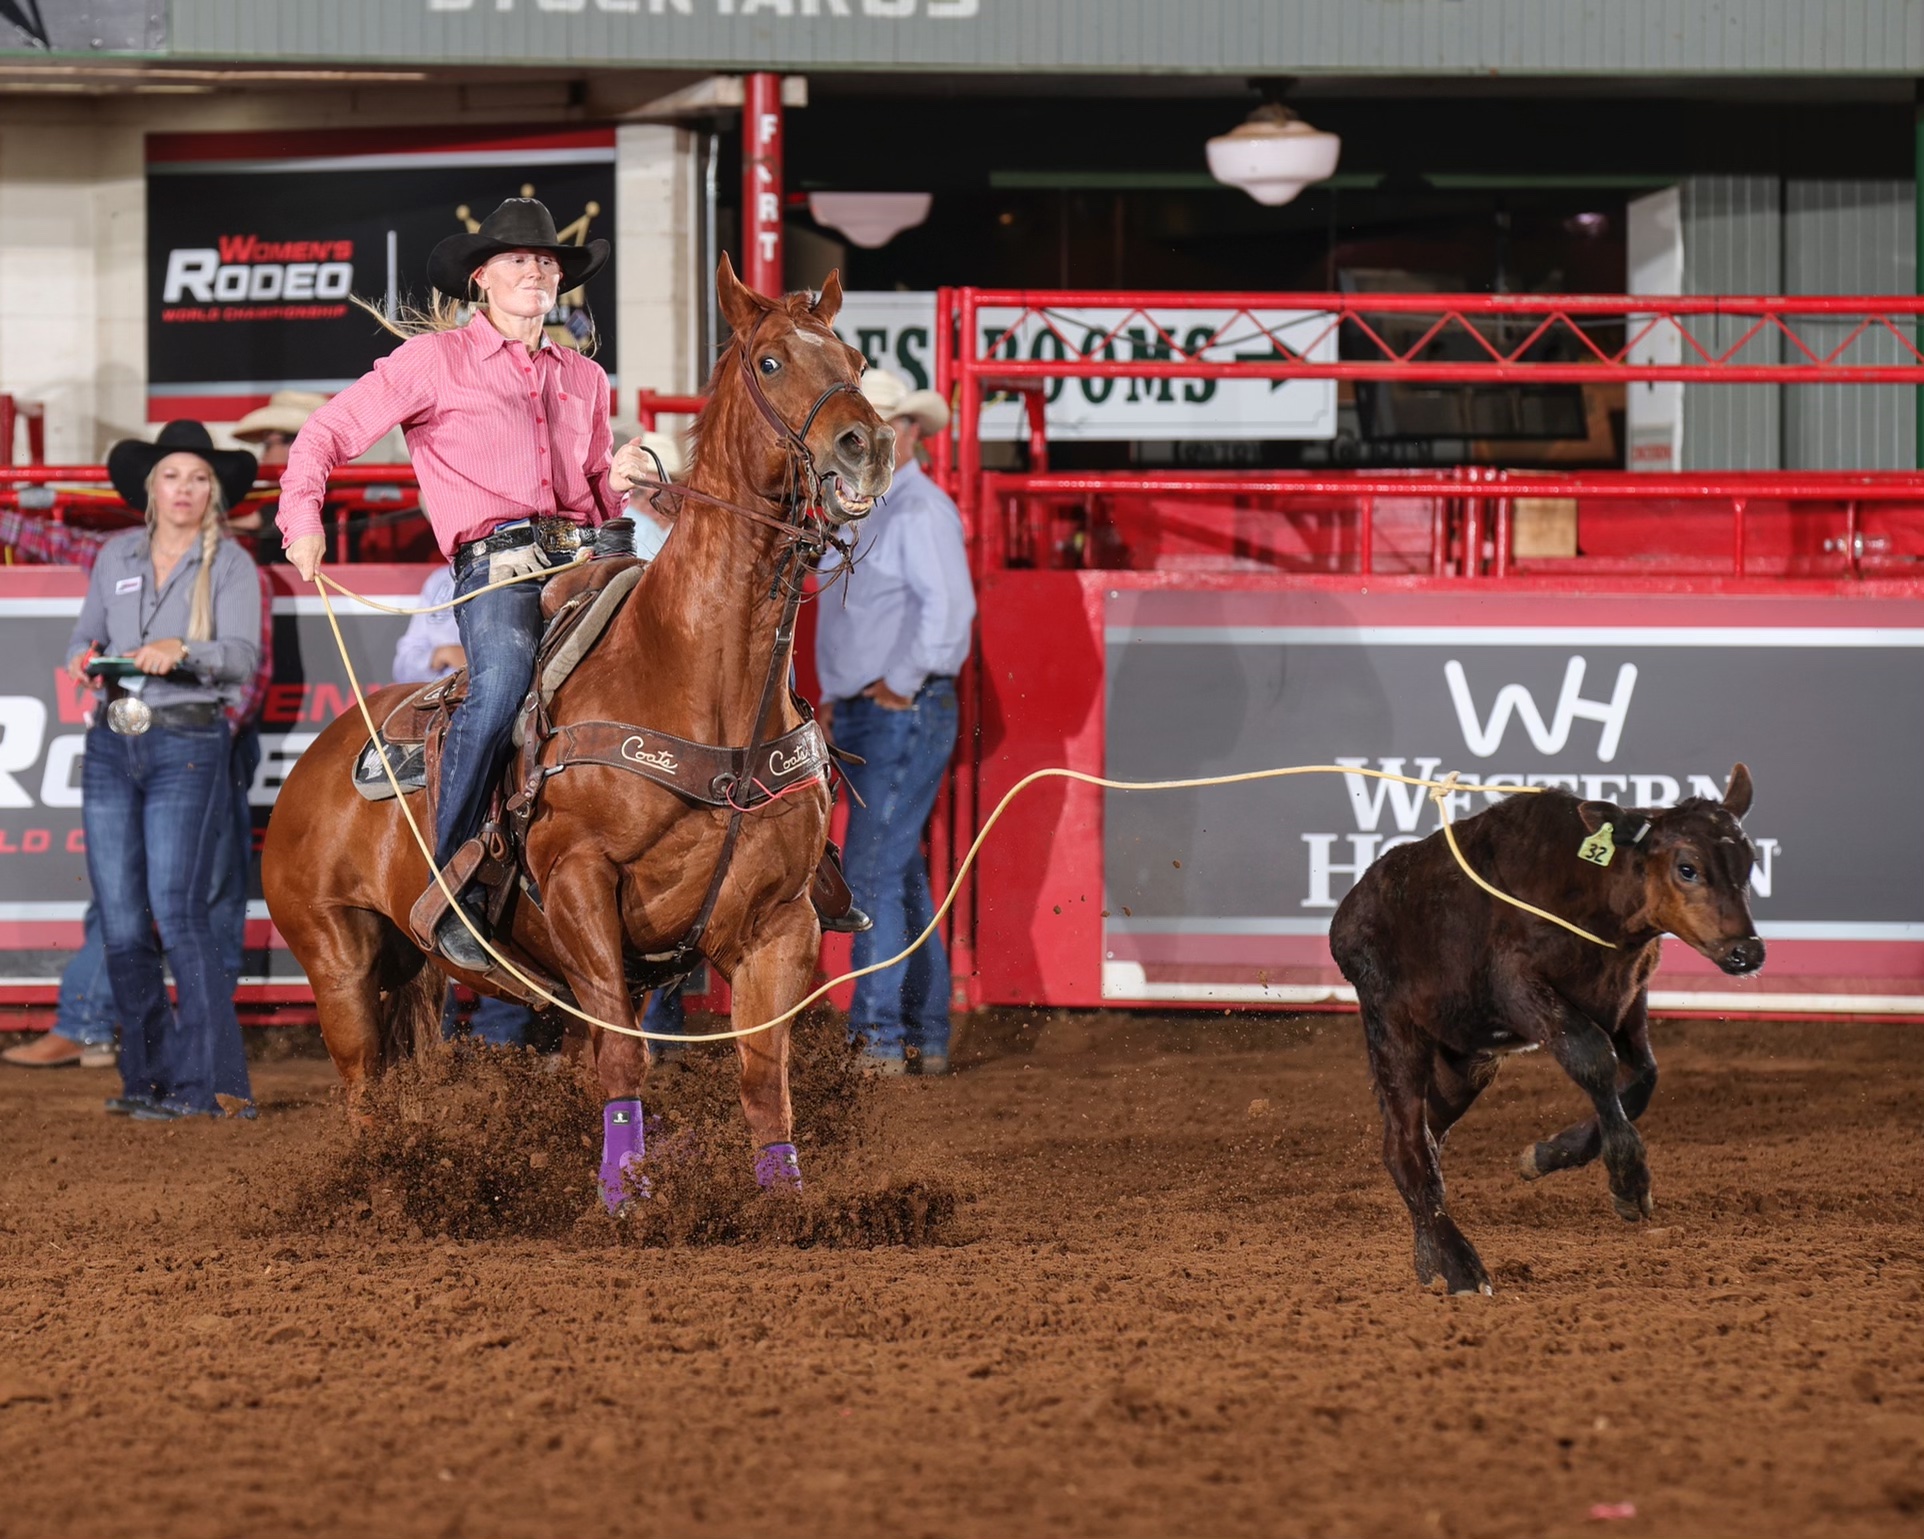 Everything You Need To Know About The 2022 Women’s Rodeo World Championship